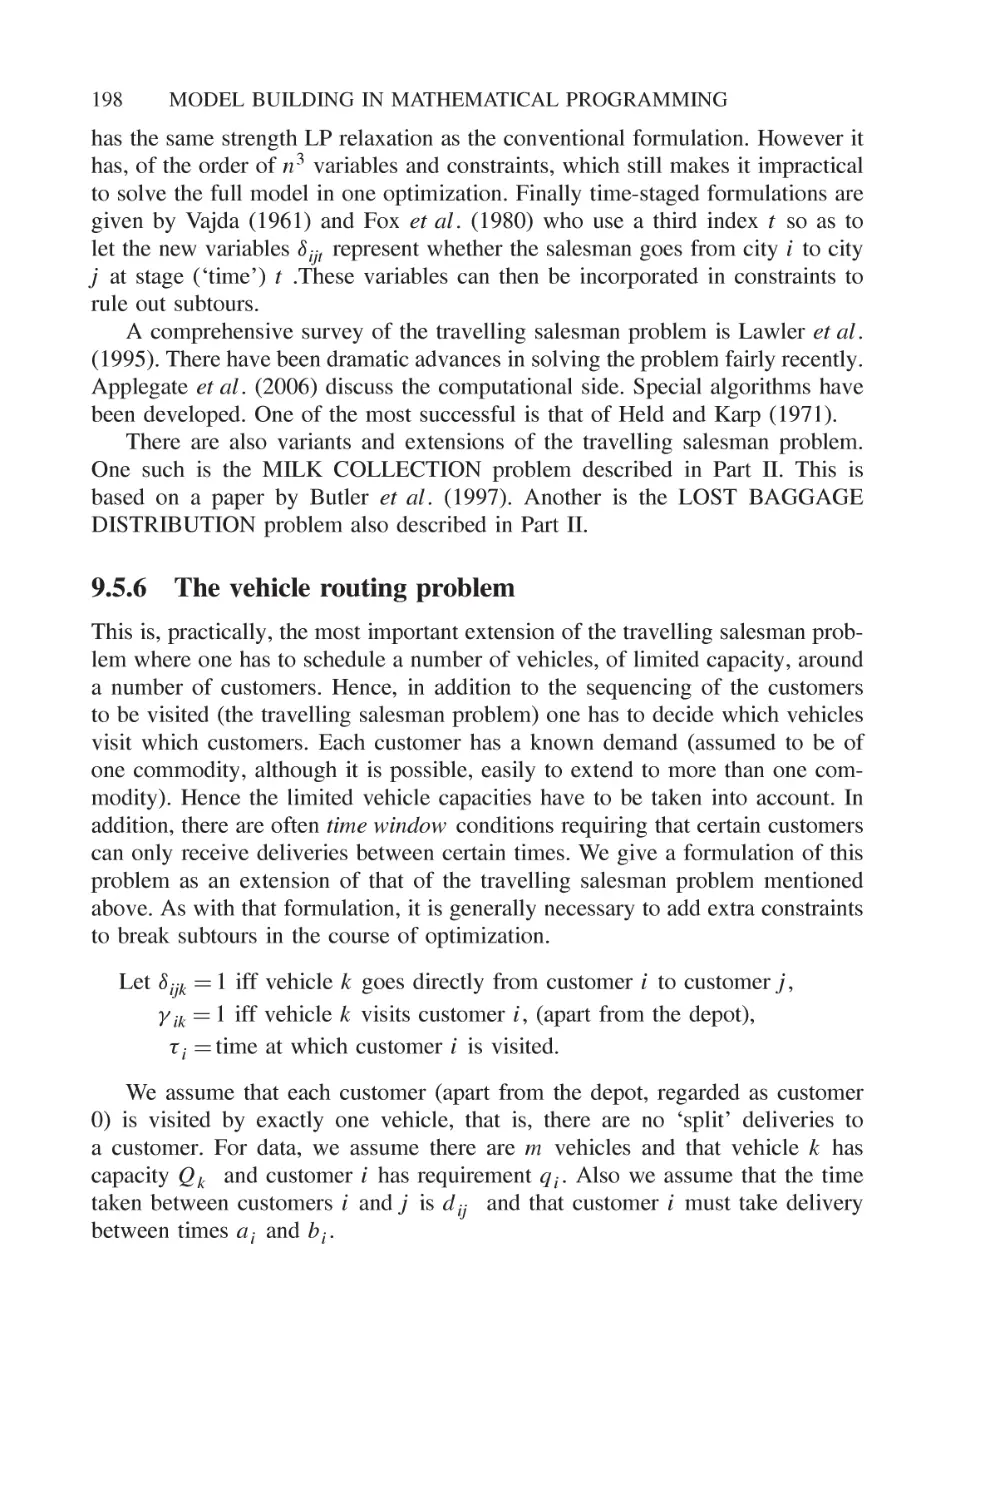 9.5.6 The vehicle routing problem